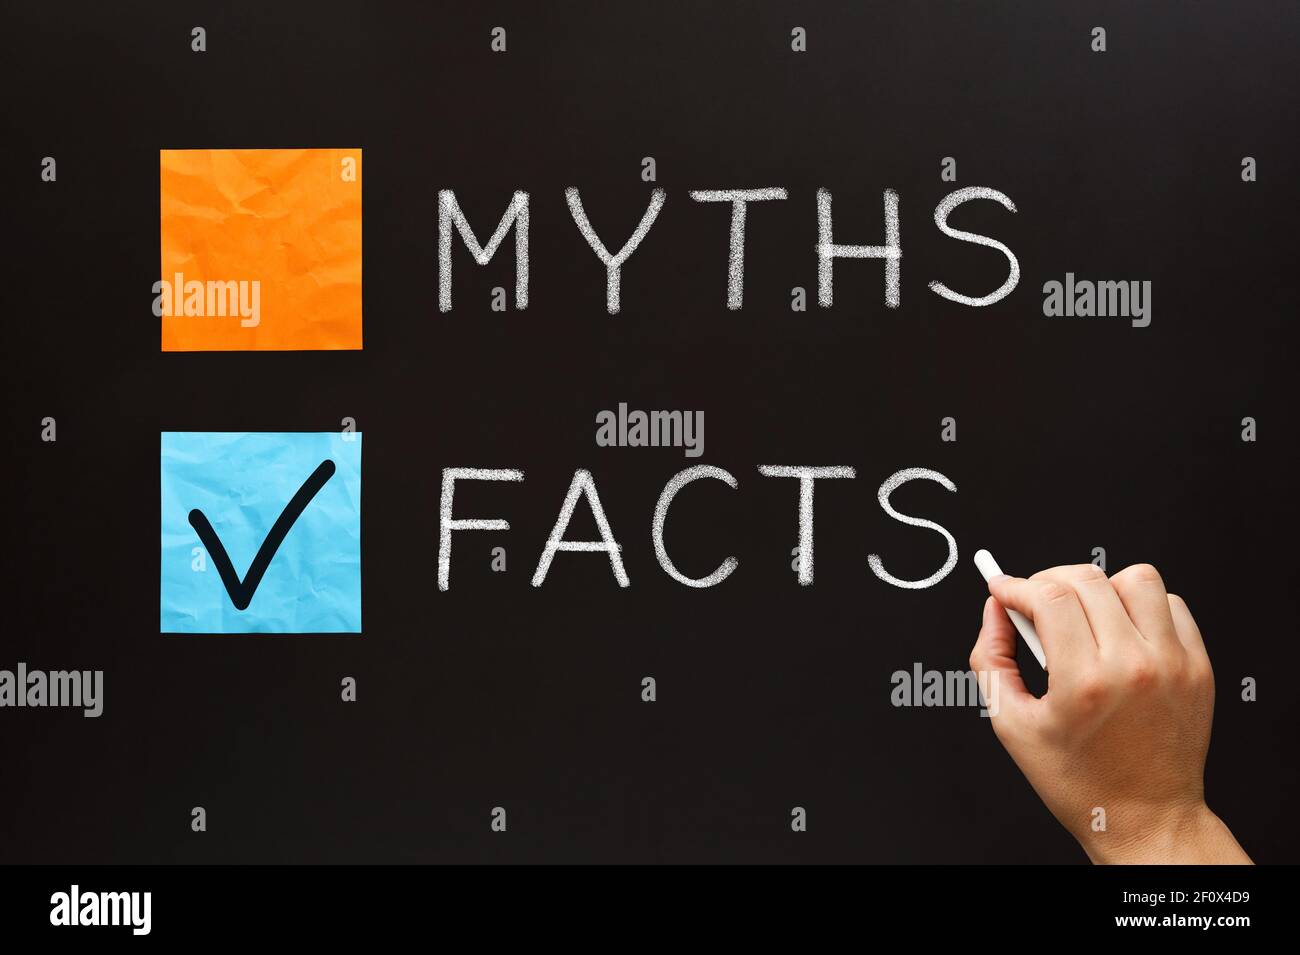 Hand writing Myths or Facts concept with white chalk on blackboard. Choose the Facts over the Myths. Stock Photo